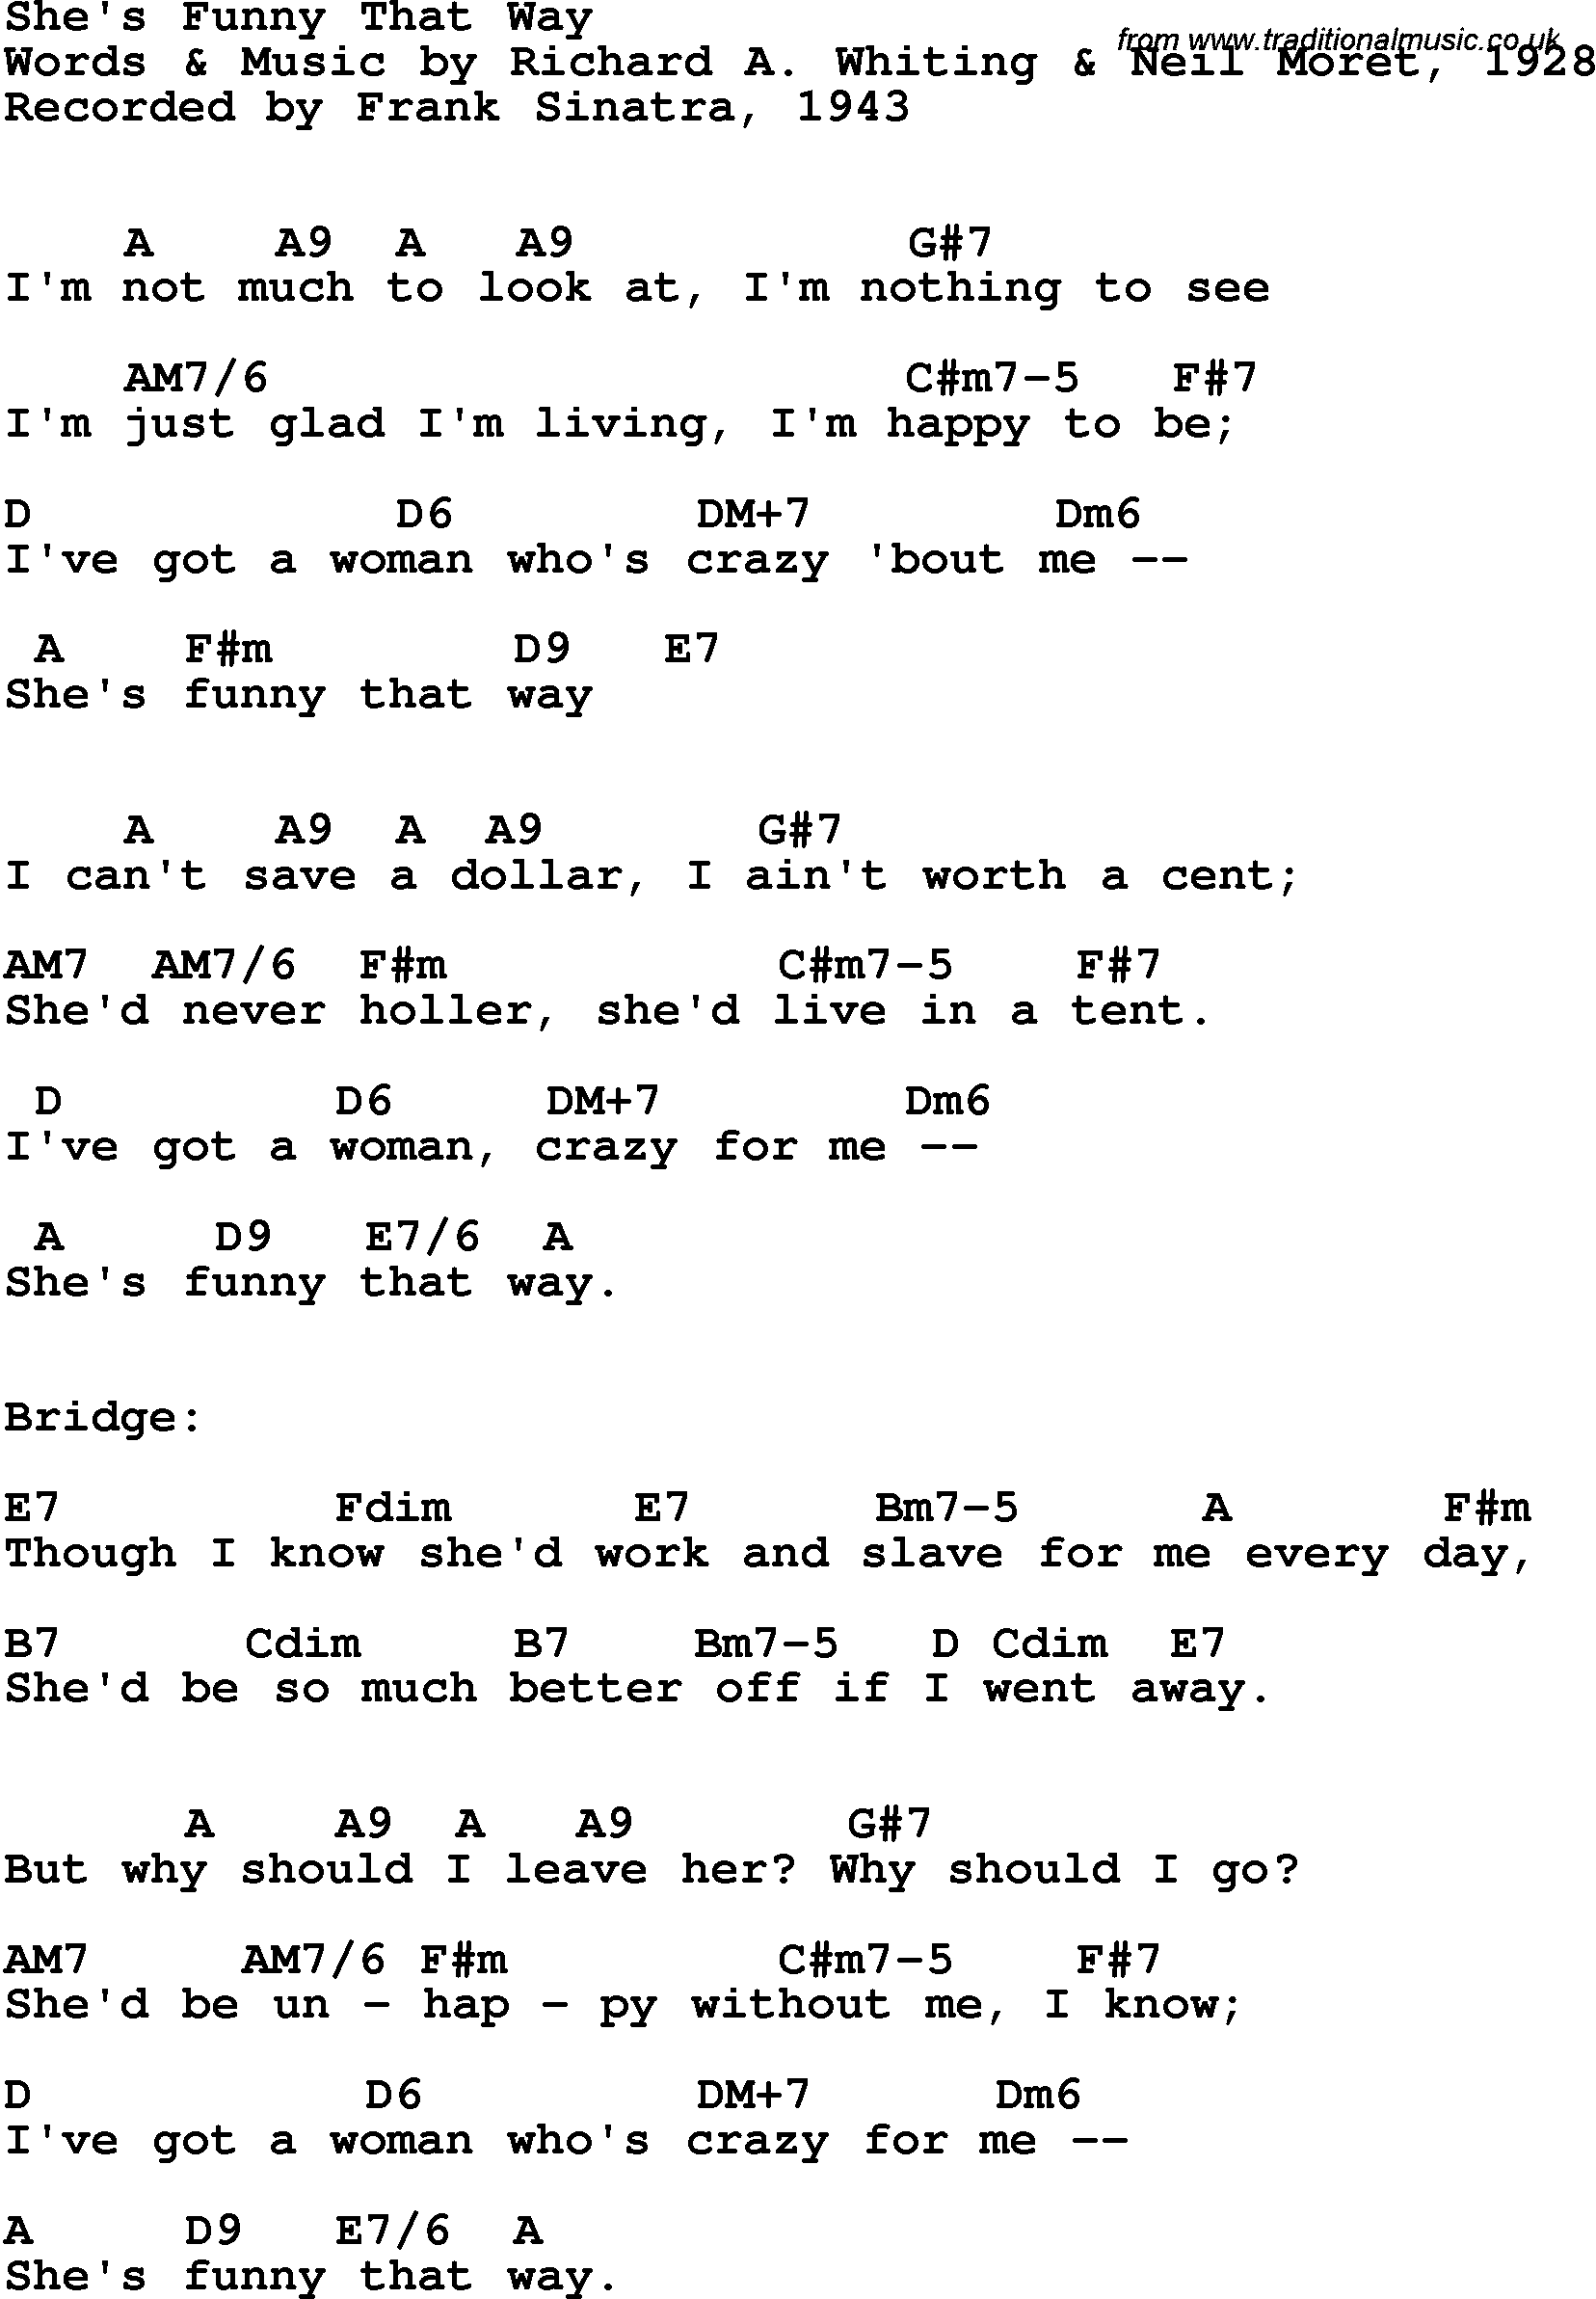 Song Lyrics with guitar chords for She's Funny That Way - Frank Sinatra, 1943